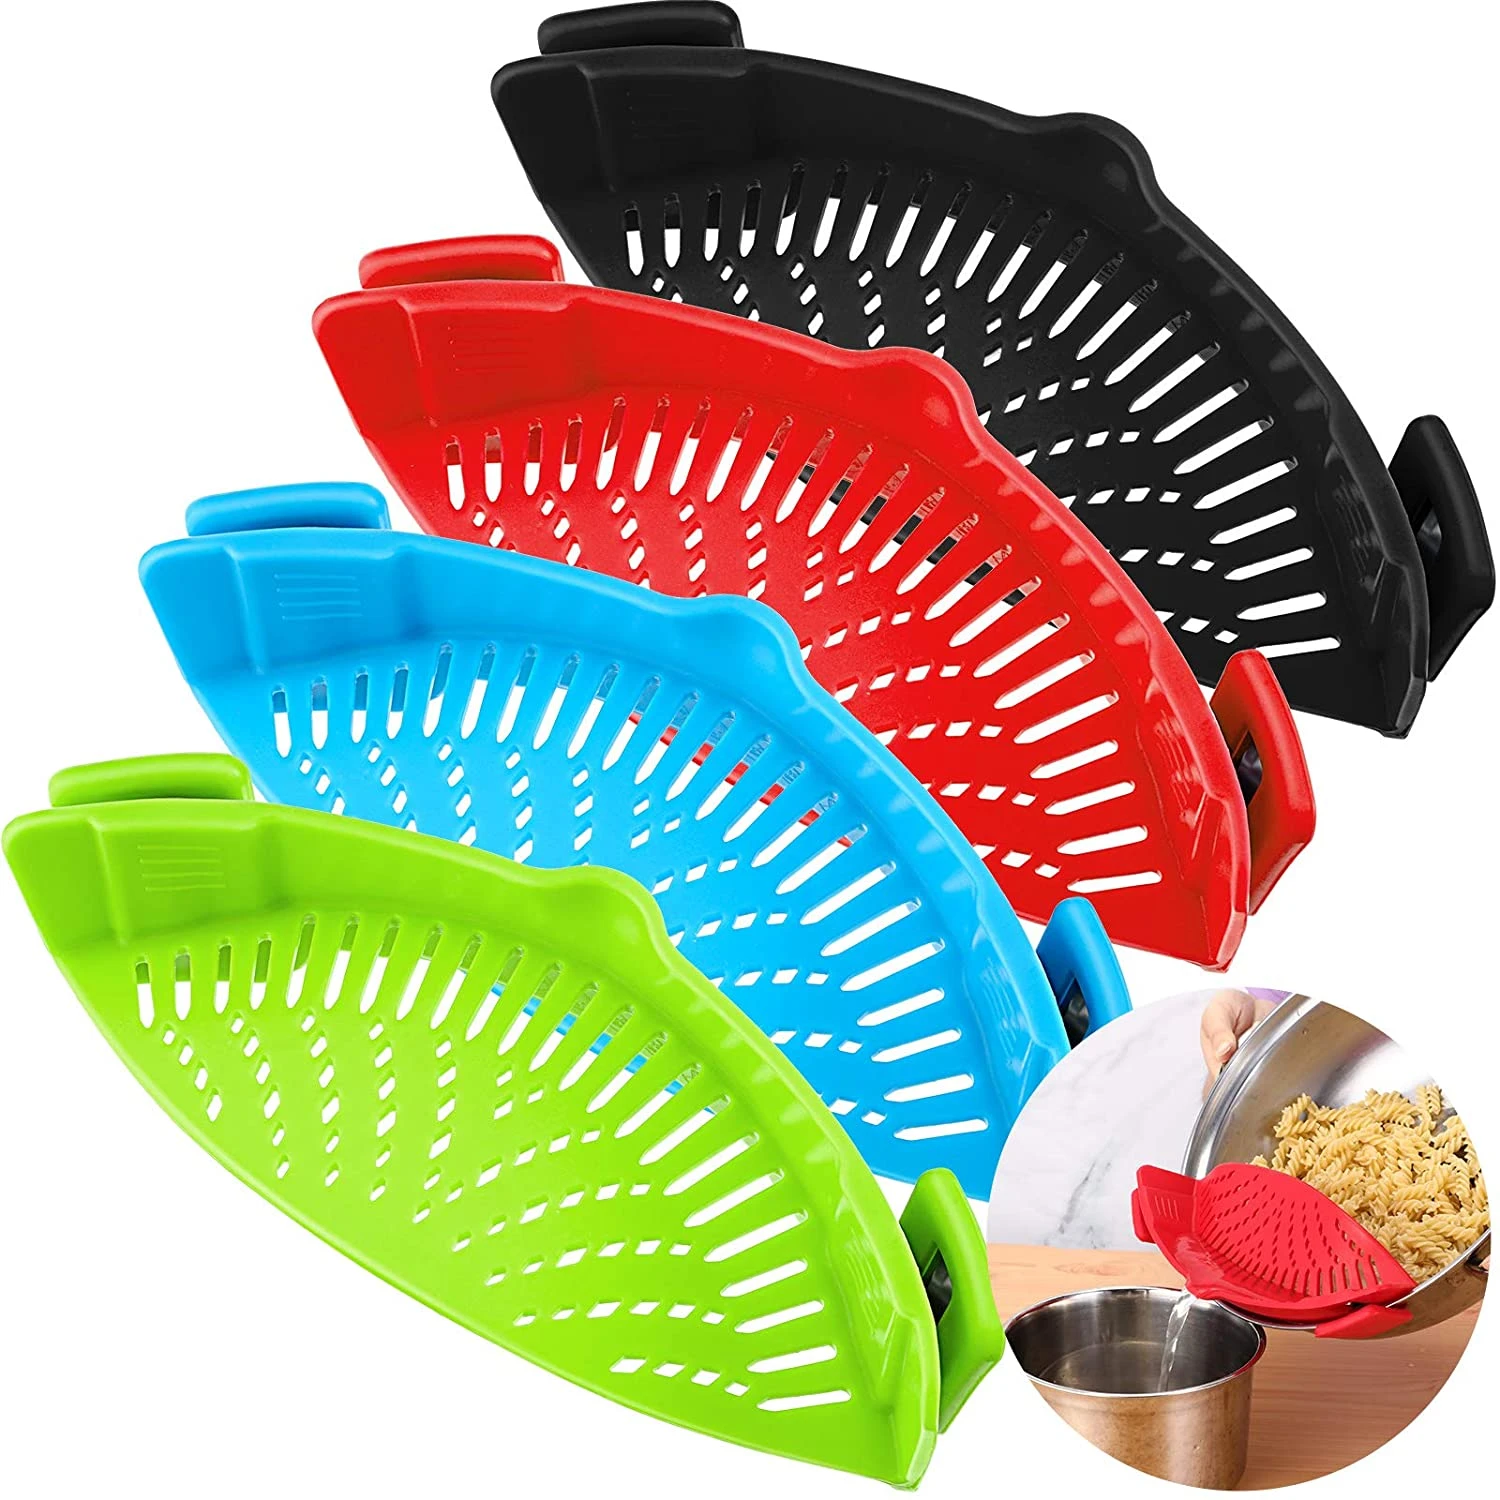 New Arrival Silicone Pot Strainer Food Grade Silicone Snap Strainer Pot Strainer Fits Almost Pots